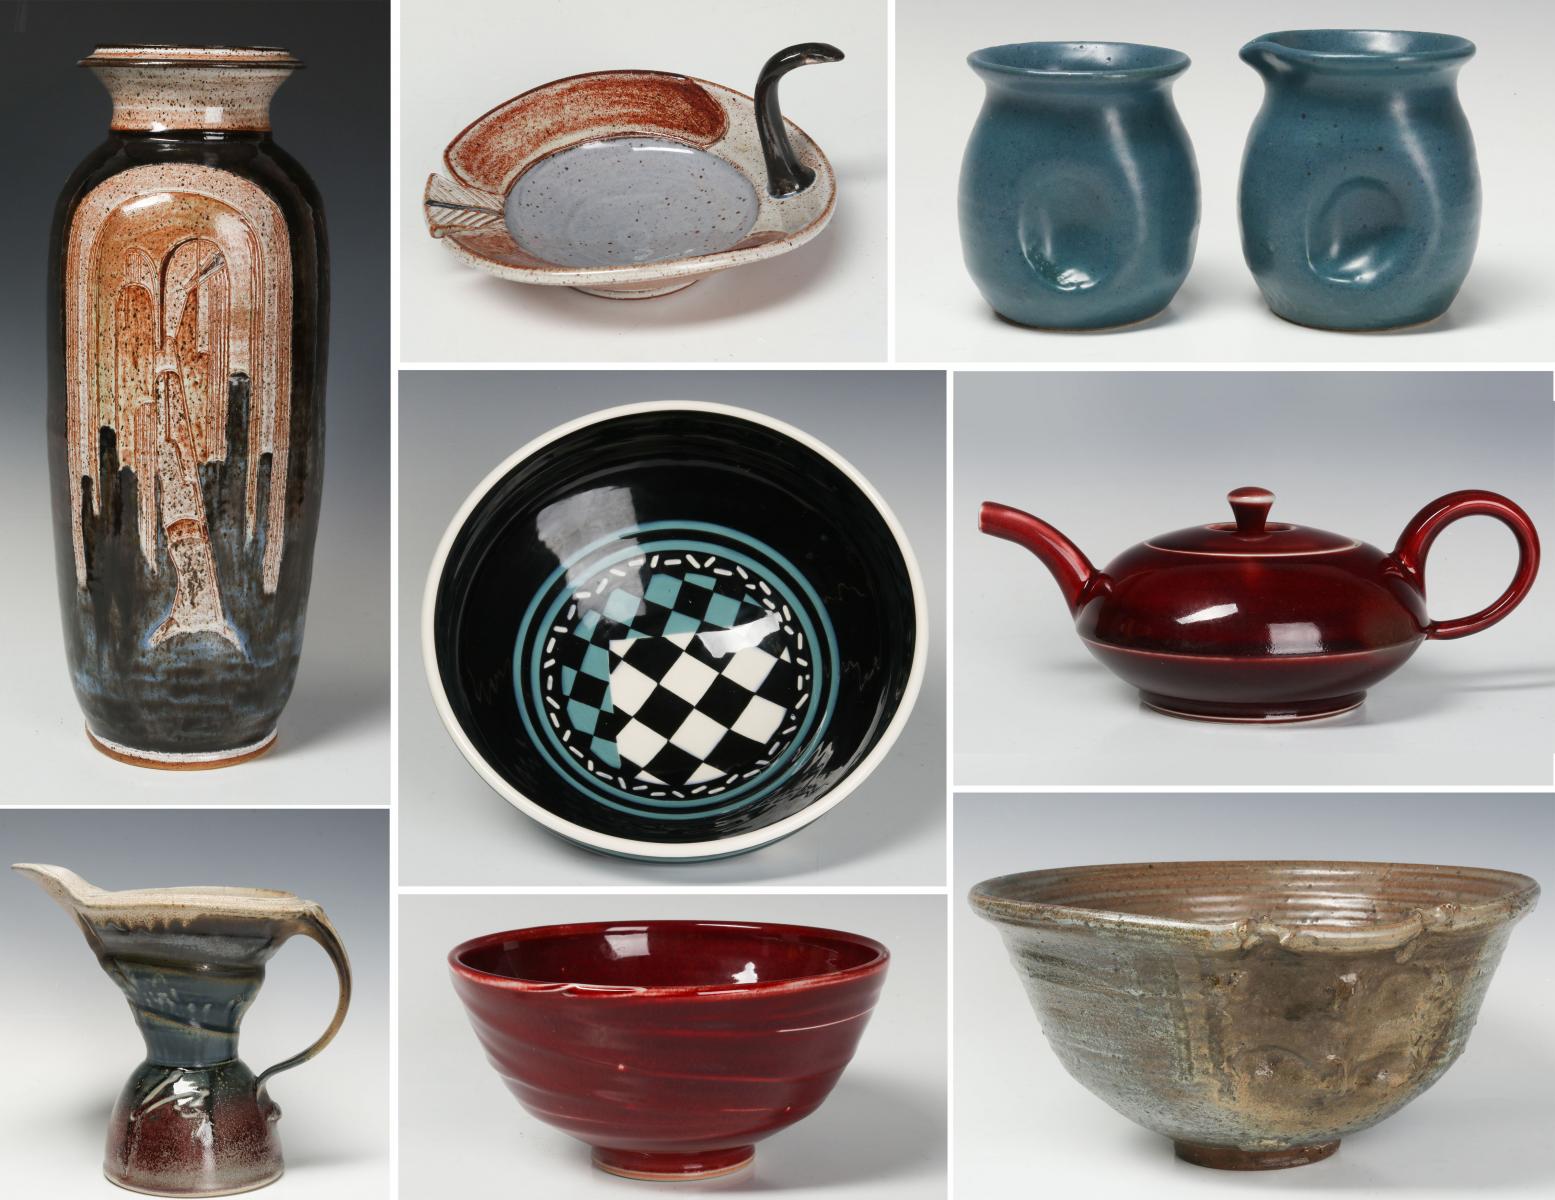 AN ESTATE COLLECTION OF NINE STUDIO ART POTTERY WORKS